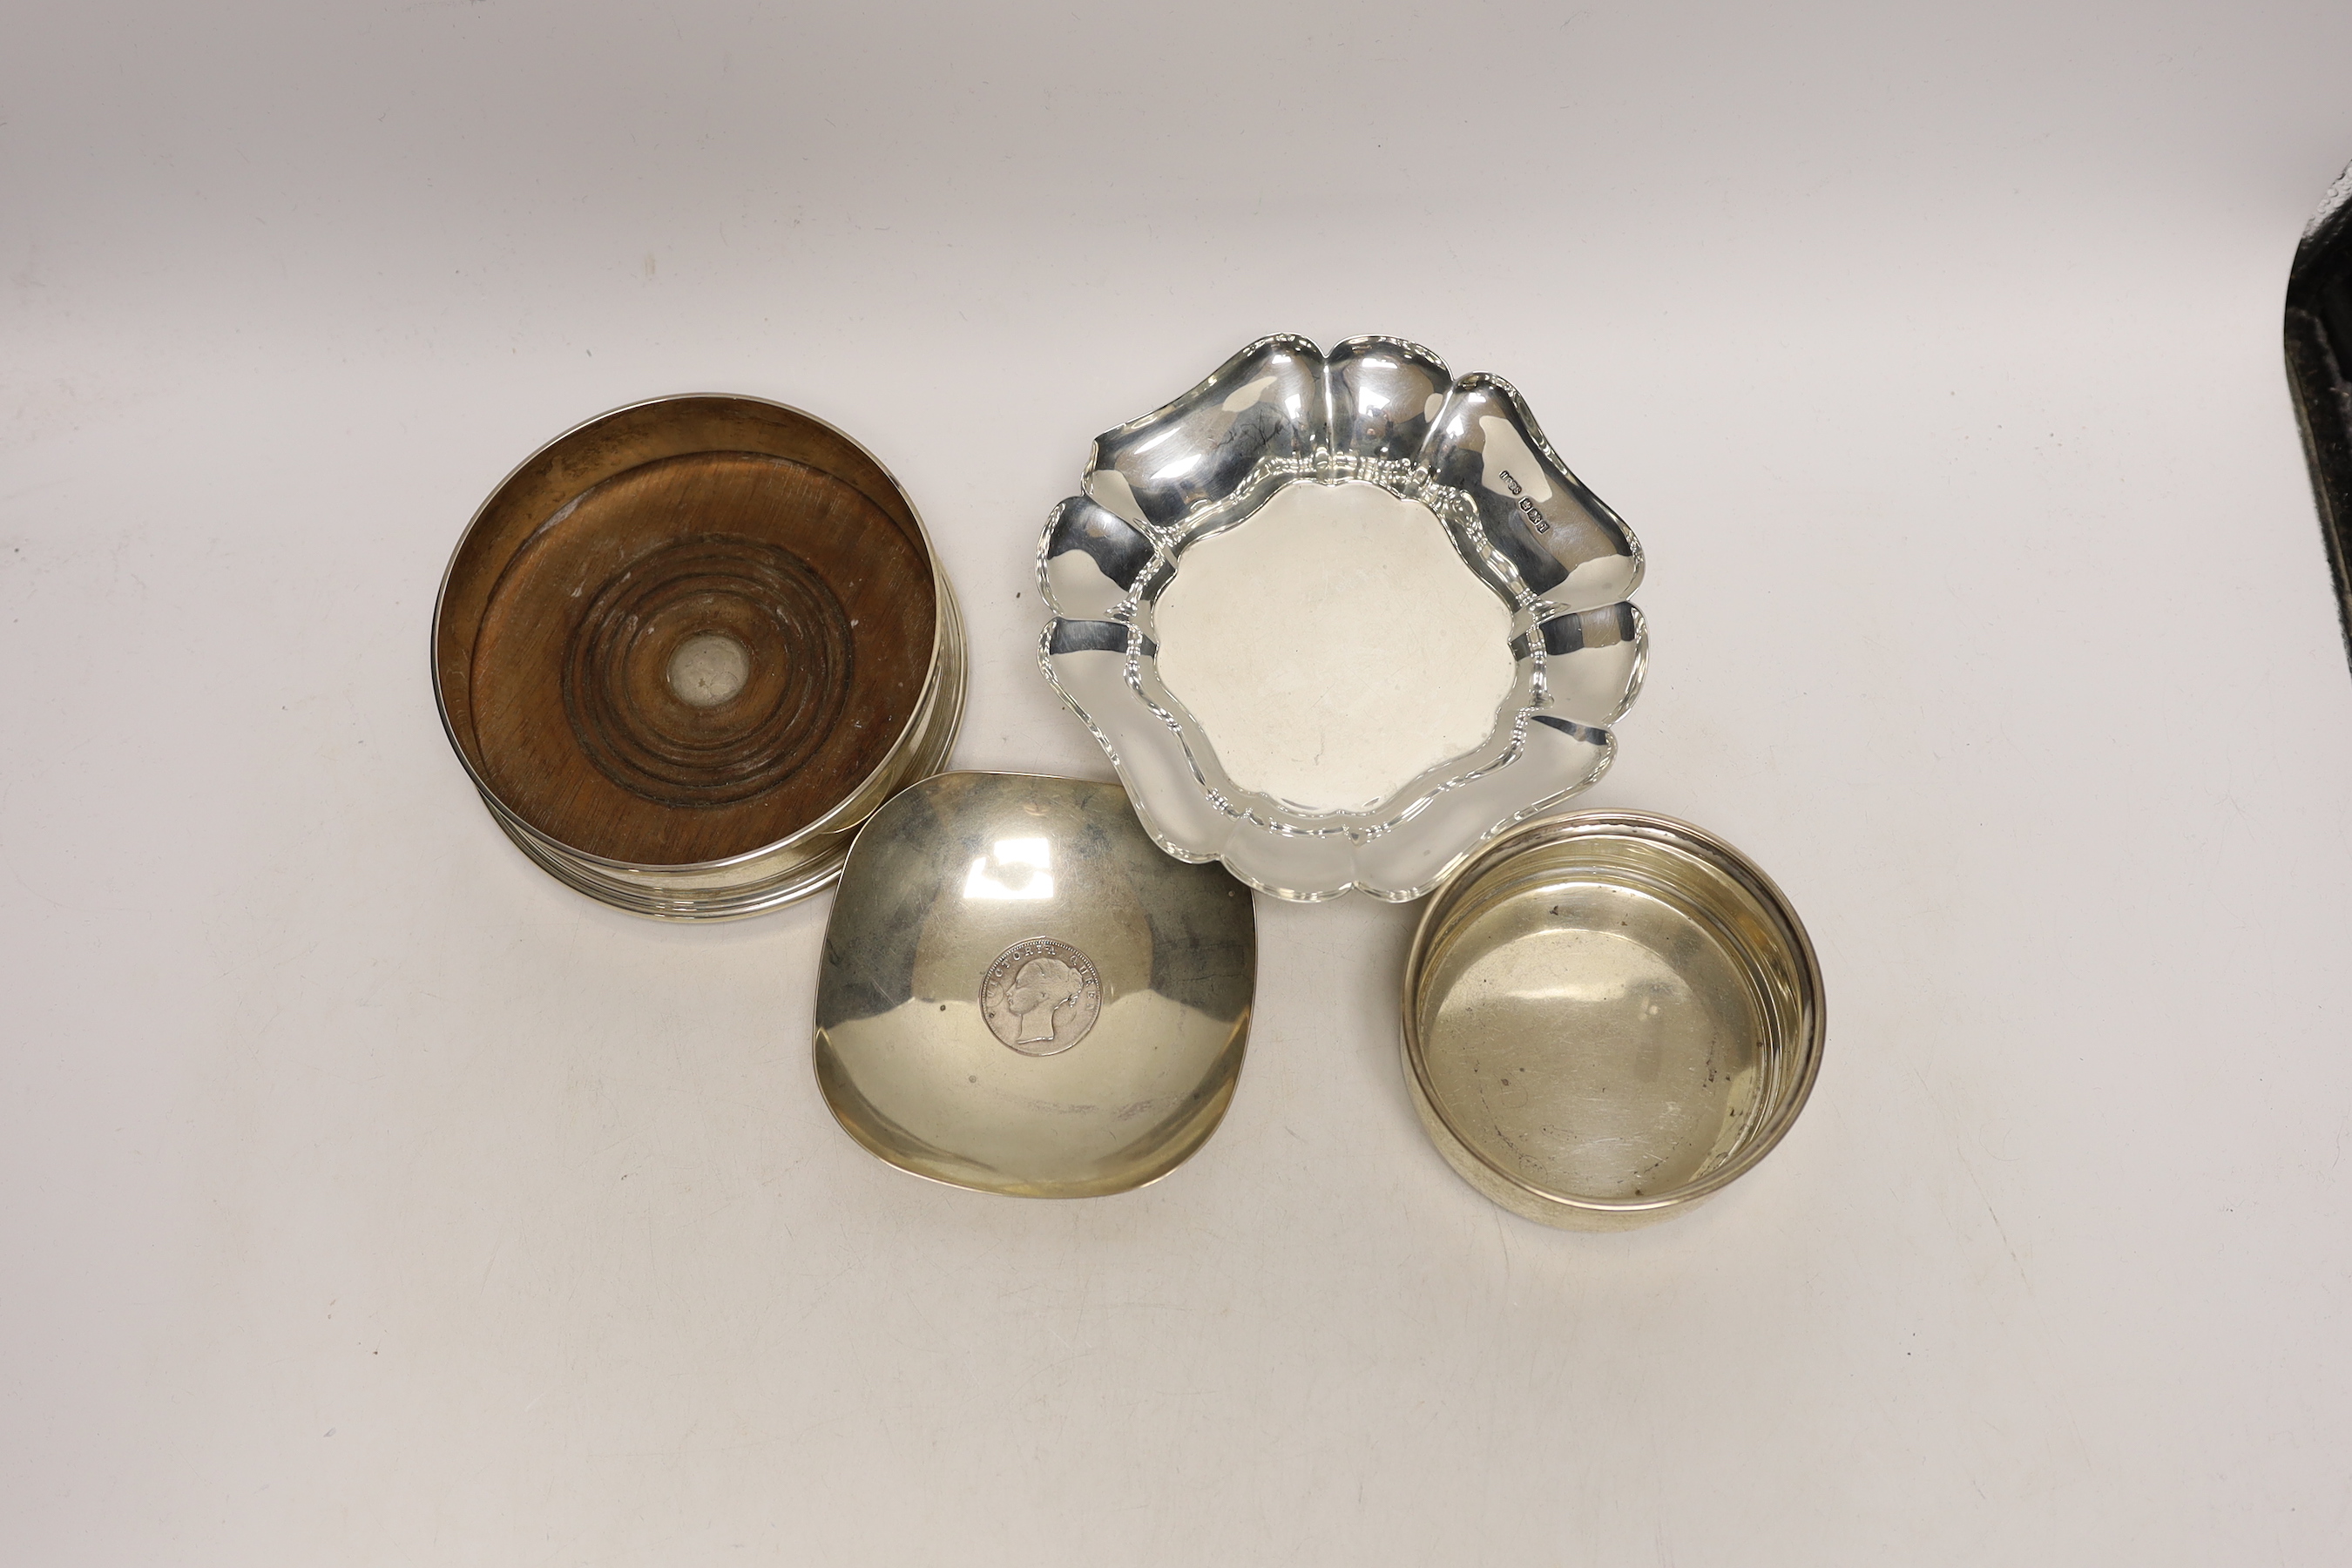 A small George V silver bowl, Sheffield, 1934, a silver bottle coaster, a small Indian white metal dish with inset rupee coin and a further small silver christening bowl.